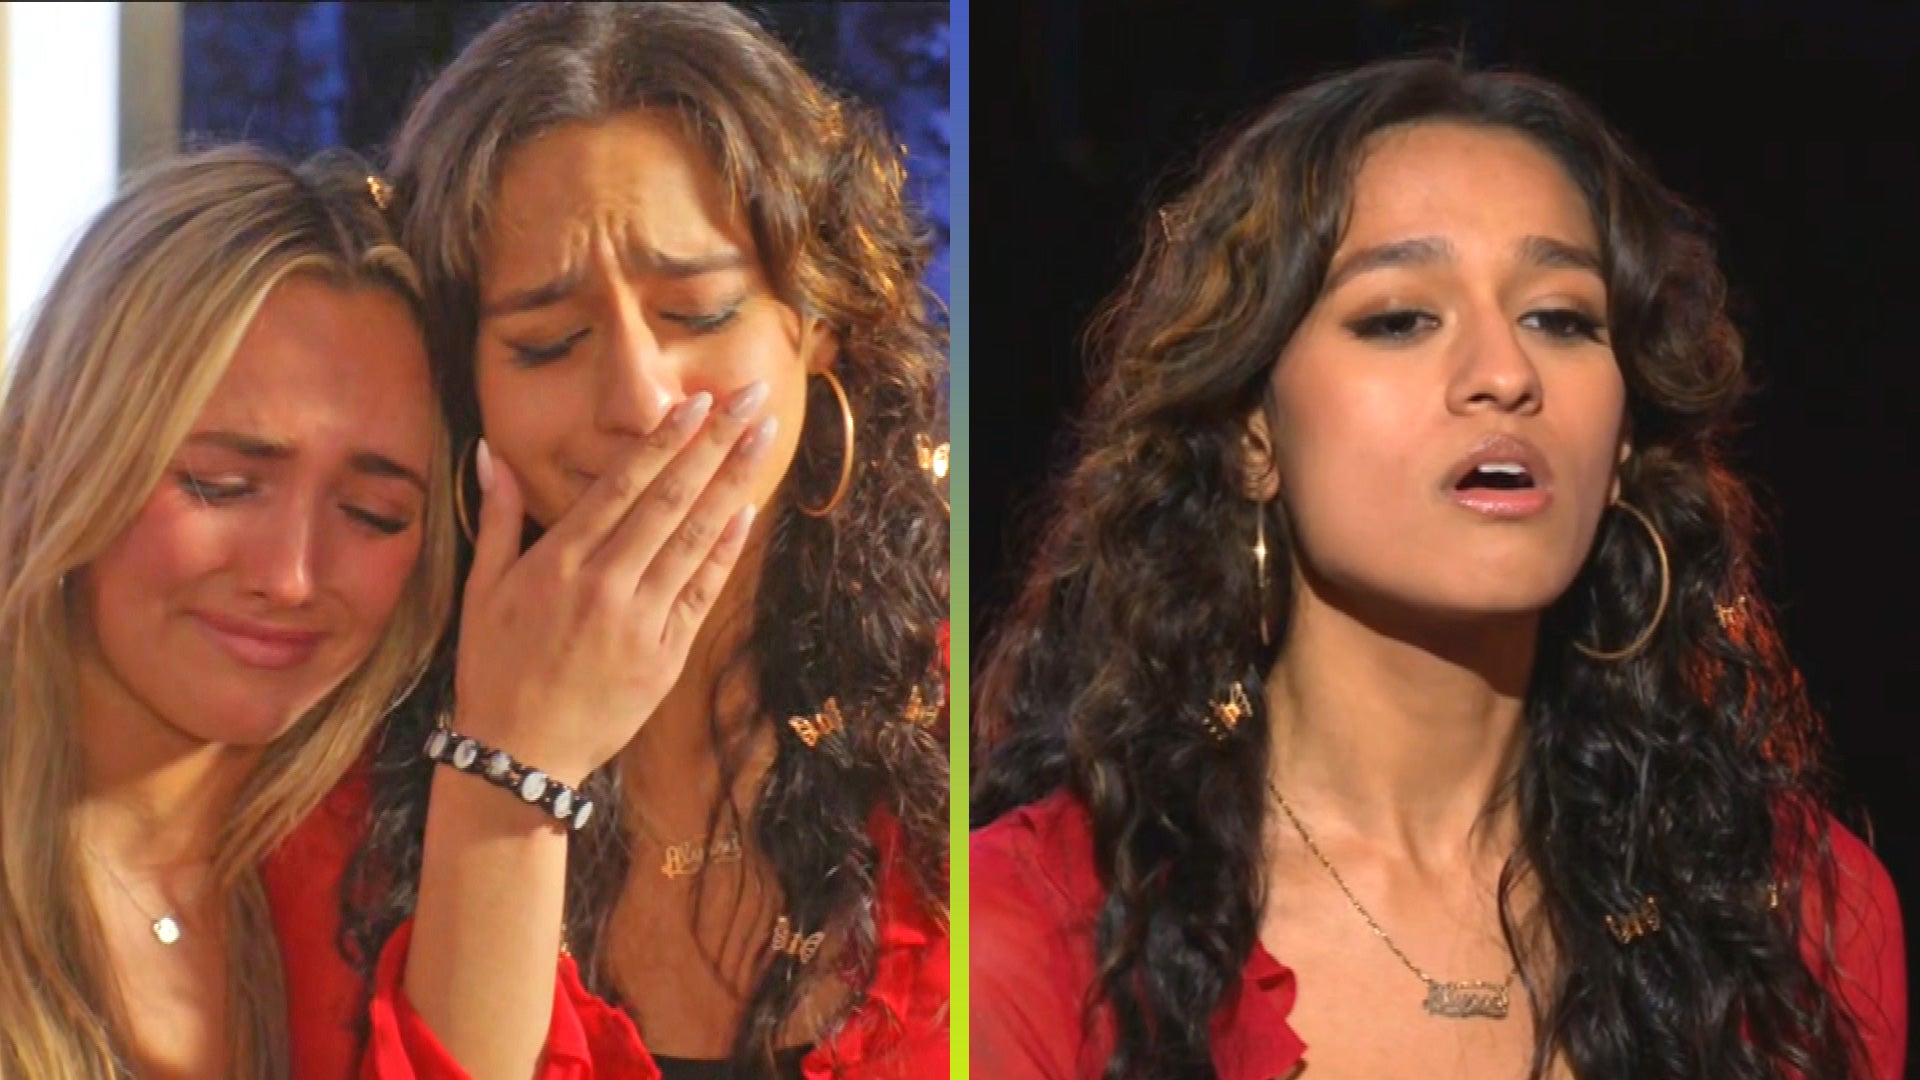 'American Idol': Alyssa Raghu Doesn’t Make Top 24 After Previously Reaching Top 8